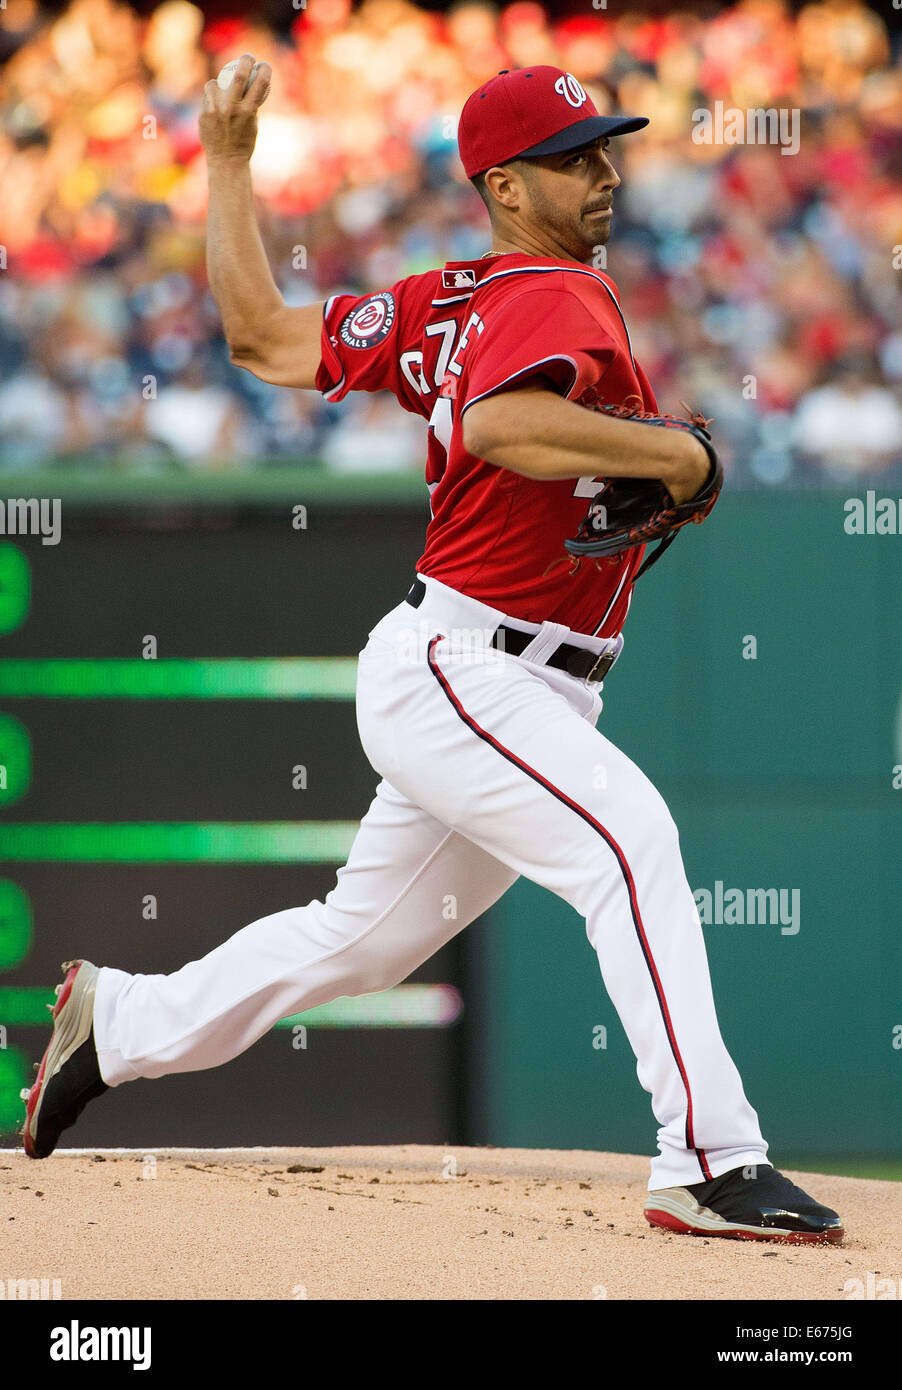 Washington, DC, USA. 16th Aug, 2014. Washington Nationals starting pitcher Gio Gonzalez (47) delivers a pitch against the Pittsburgh Pirates during the first inning of their game at Nationals Park in Washington, D.C, Saturday, August 16, 2014. Credit:  Harry E. Walker/ZUMA Wire/Alamy Live News Stock Photo